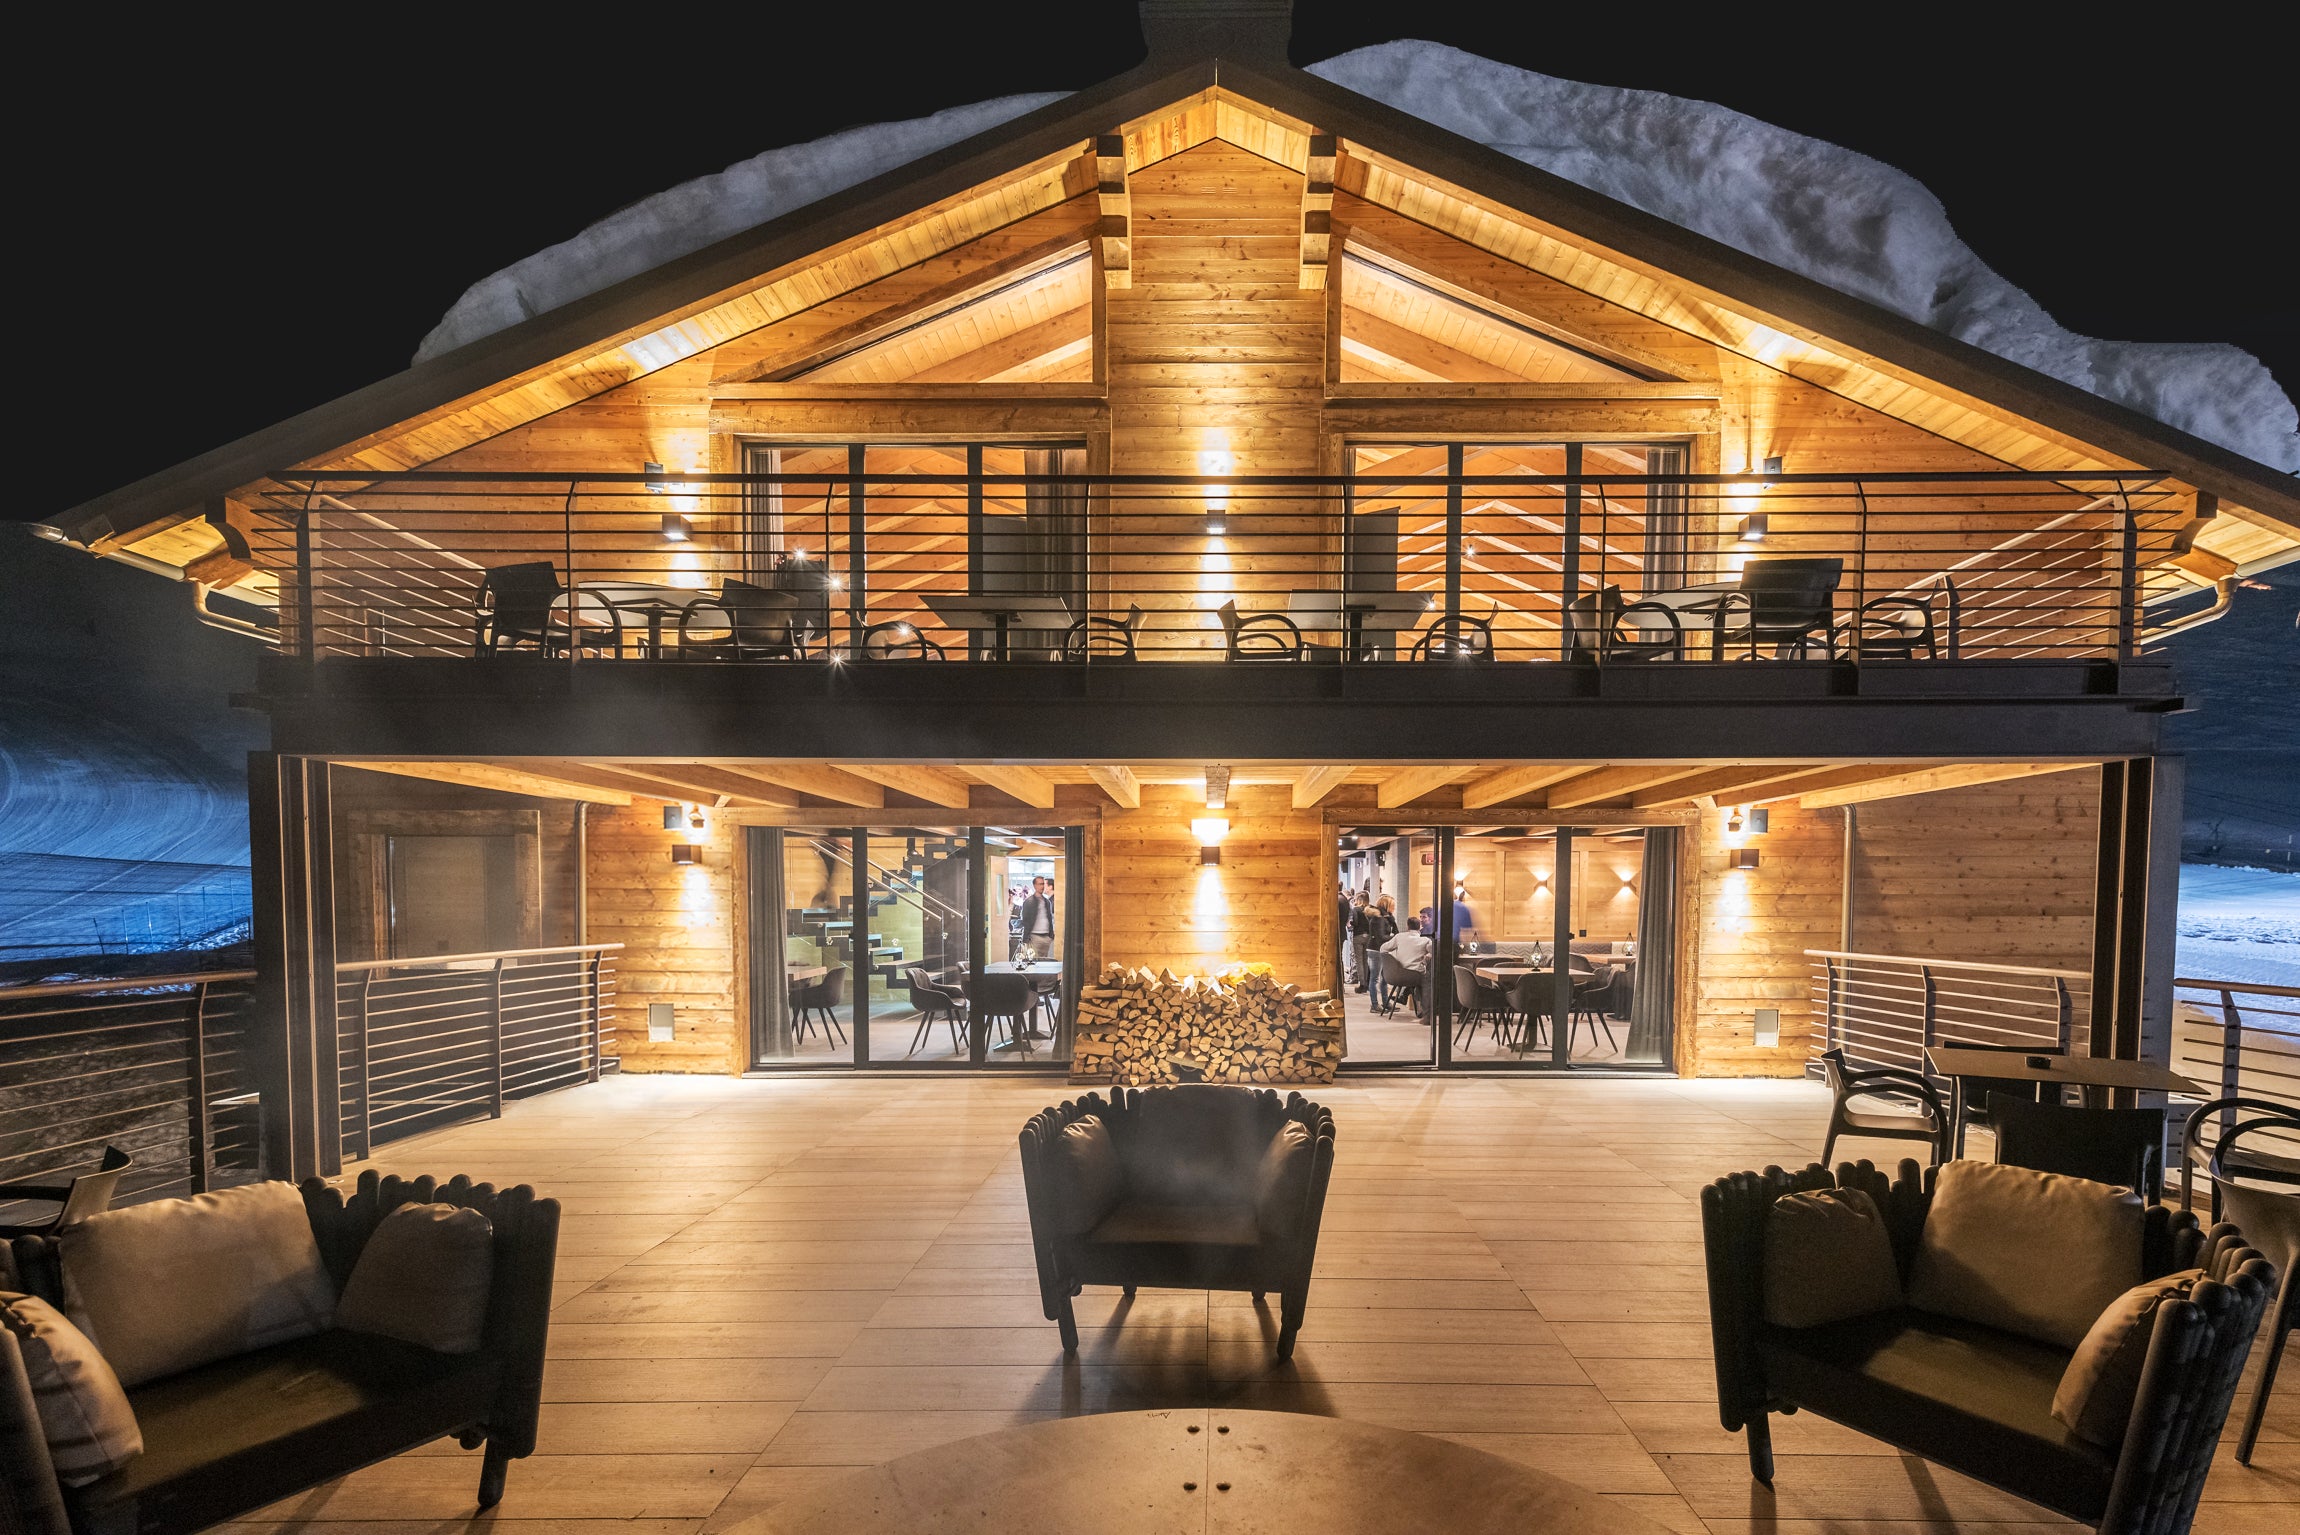 The five-star hotel Le Massif adds luxury to Courmayeur